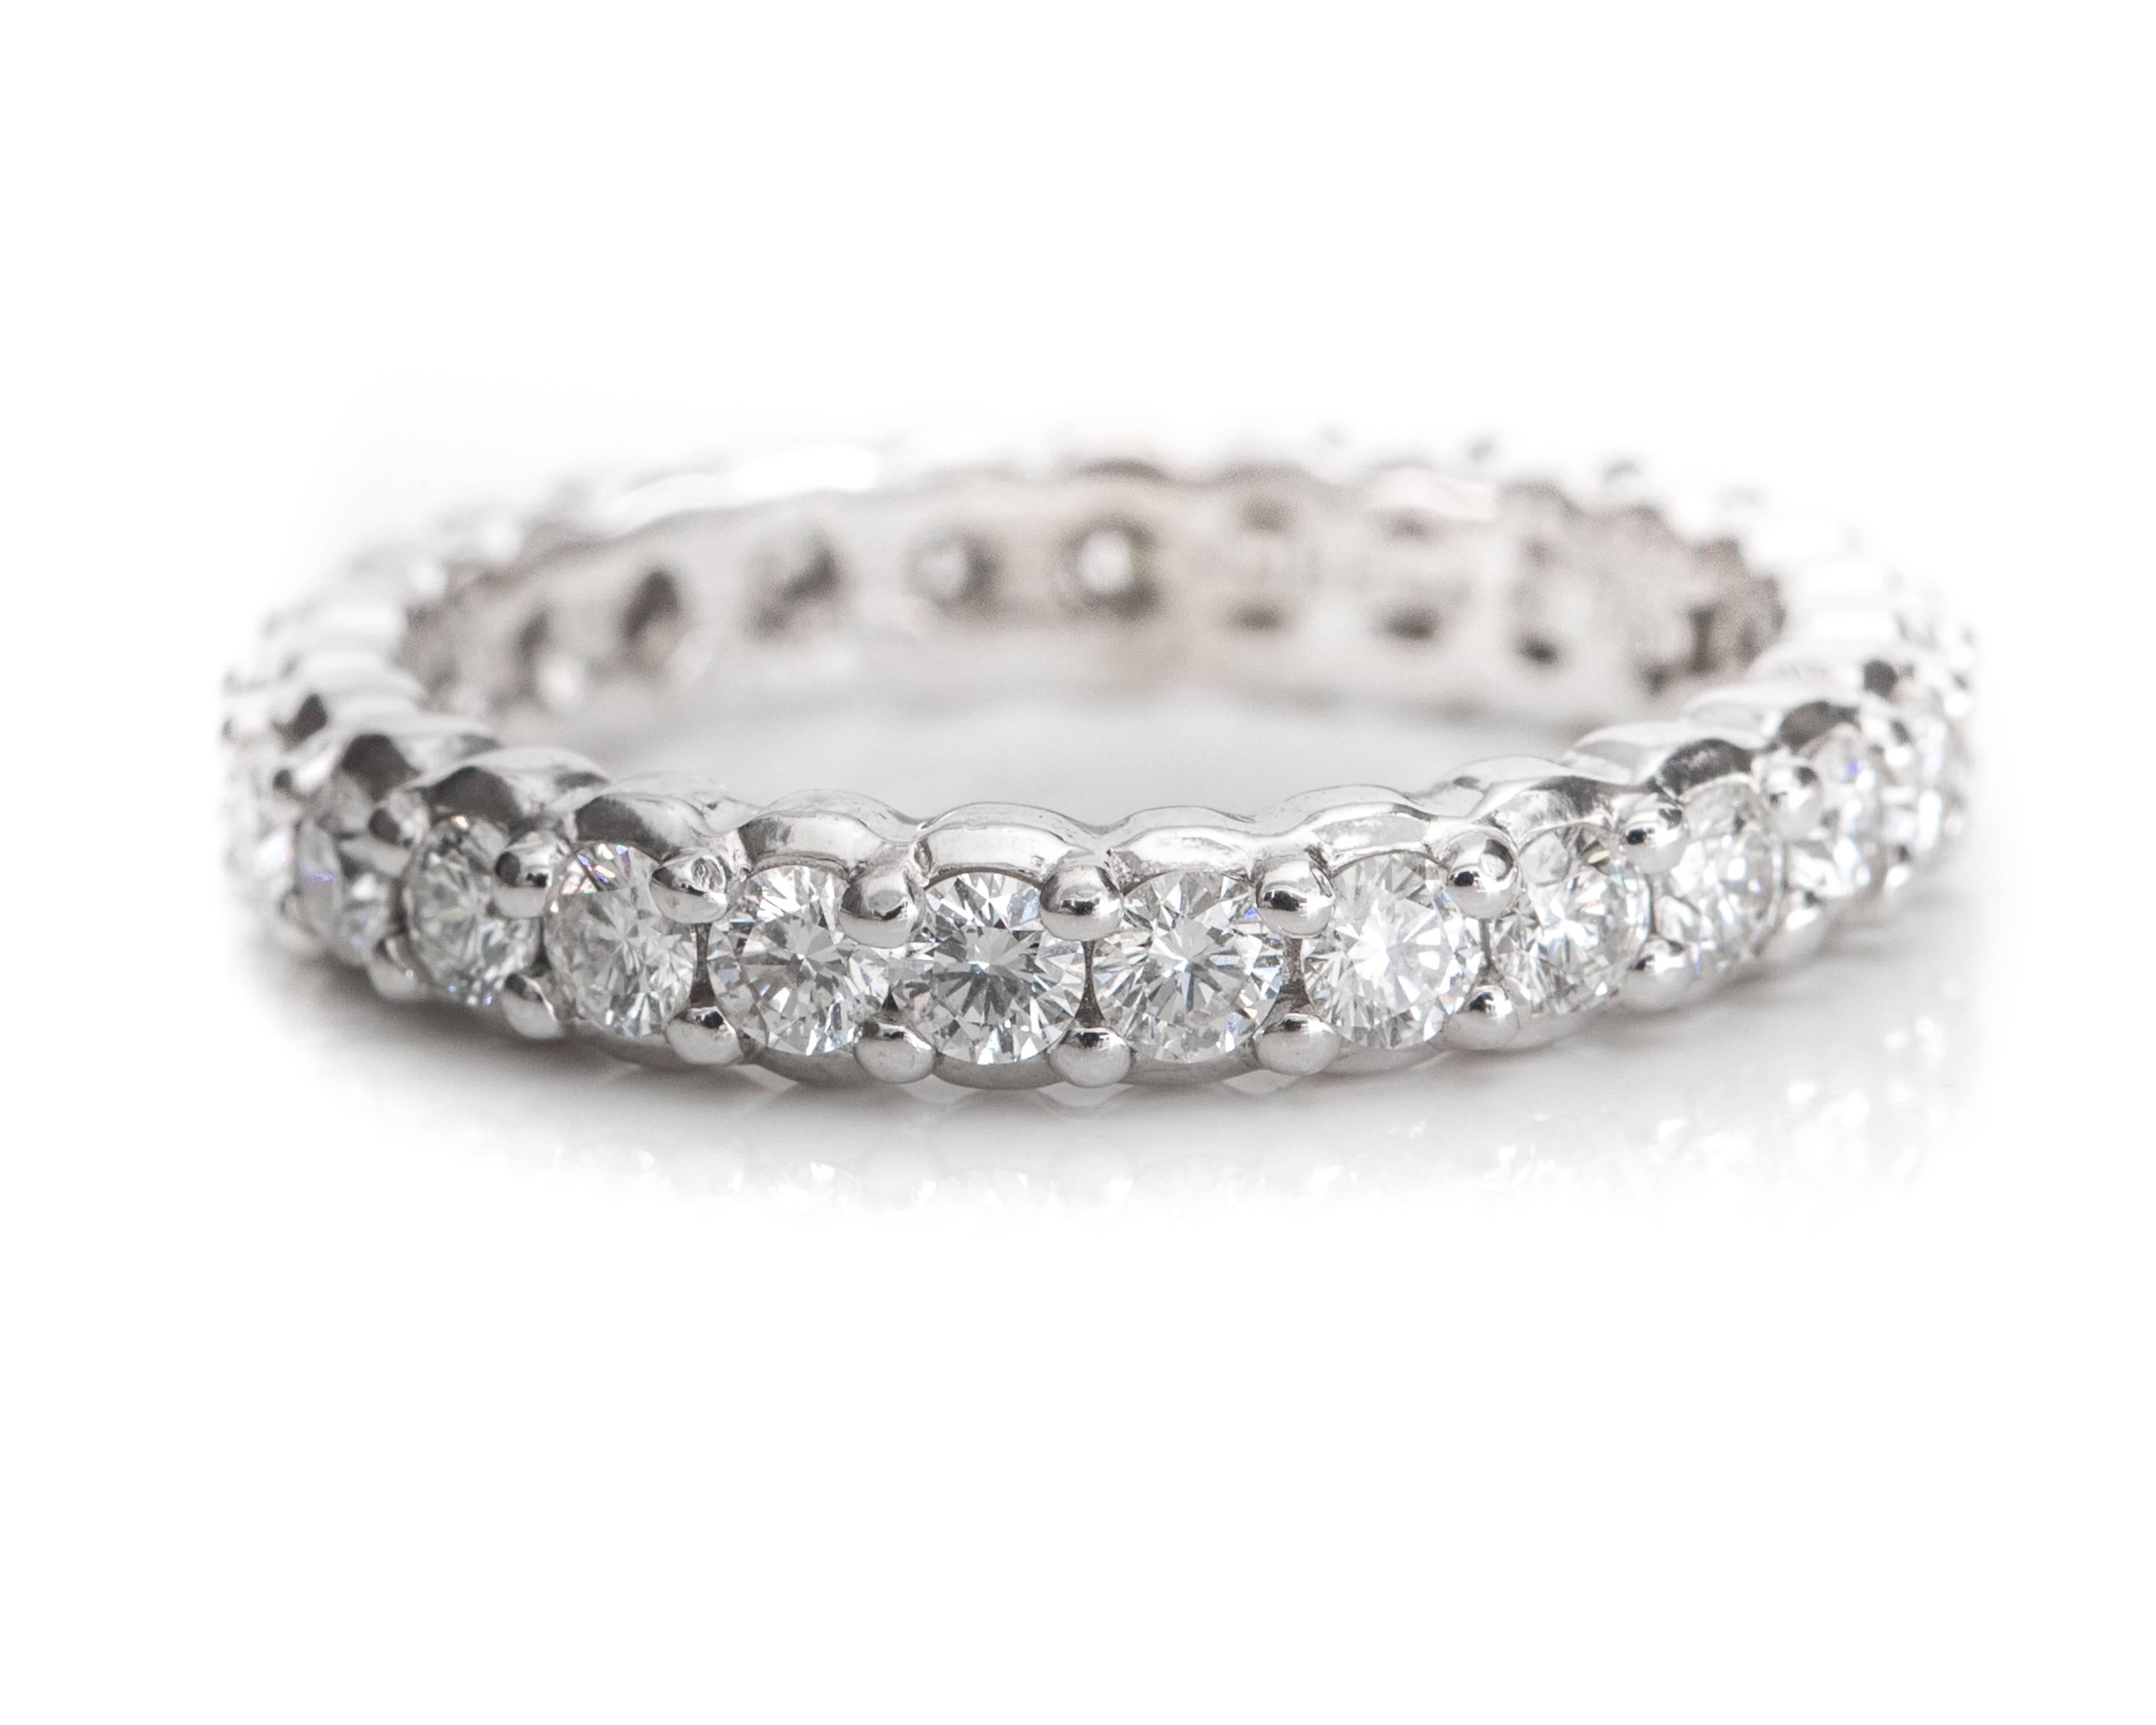 Gorgeous! This beautiful, handcrafted Paul Morelli 18 Karat White Gold and Diamond Eternity Band is perfect to wear as a wedding band, alone or stacked. This Pinpoint Eternity Band features 1.5 carats total weight of round brilliant diamonds in a 14